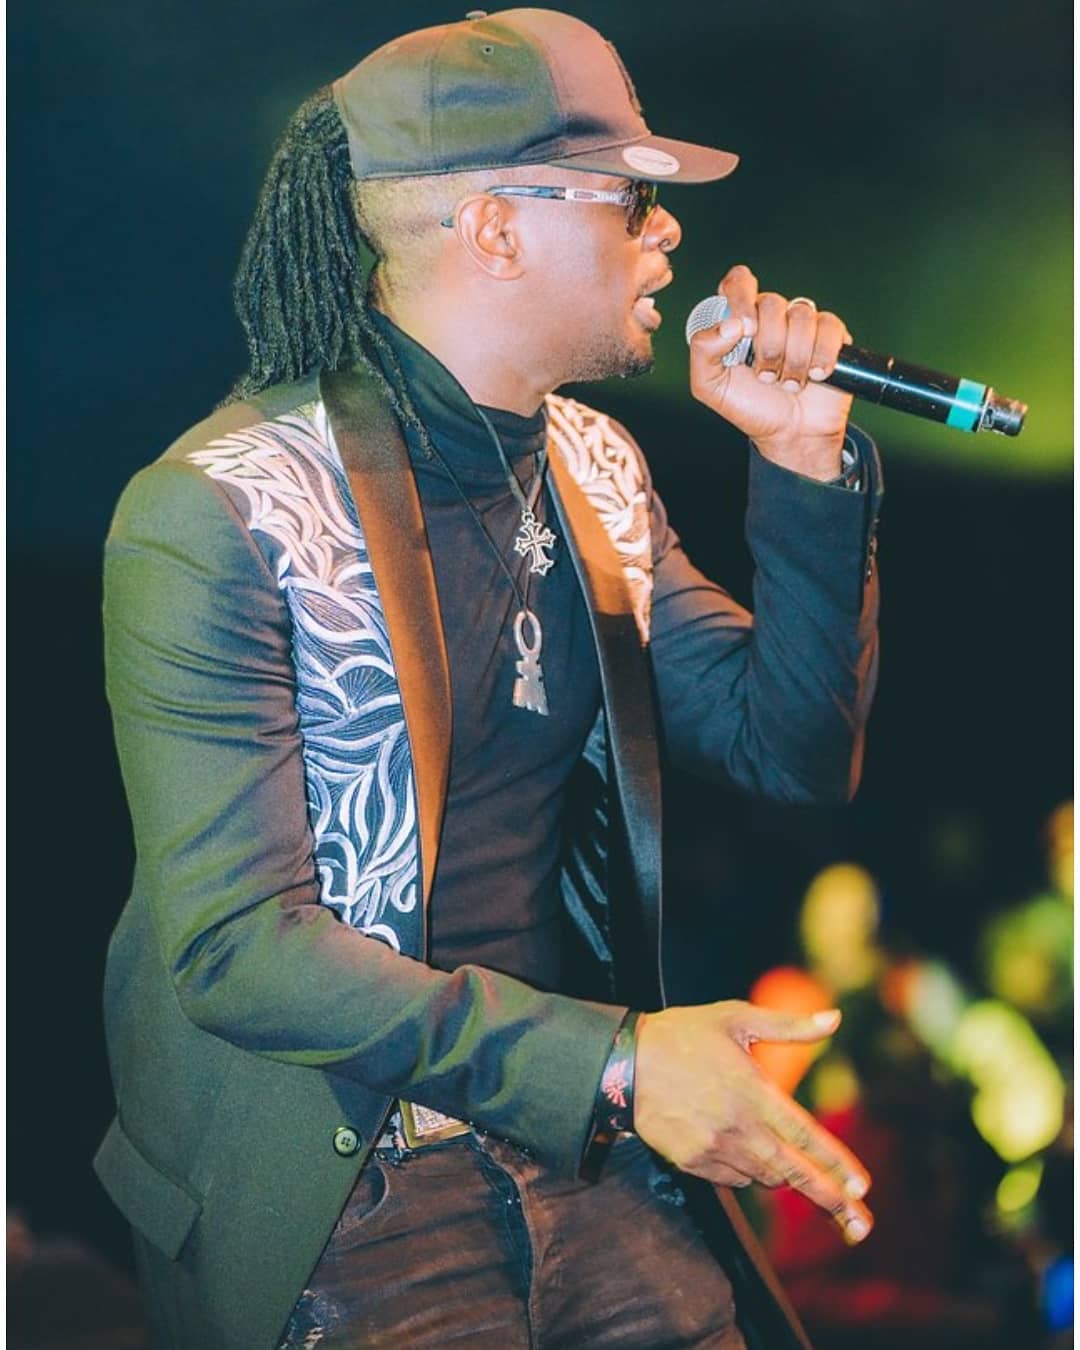 2018-03-12-Nameless: Legendary Musician Takes To The Stage And Wows At Ngoma Festival